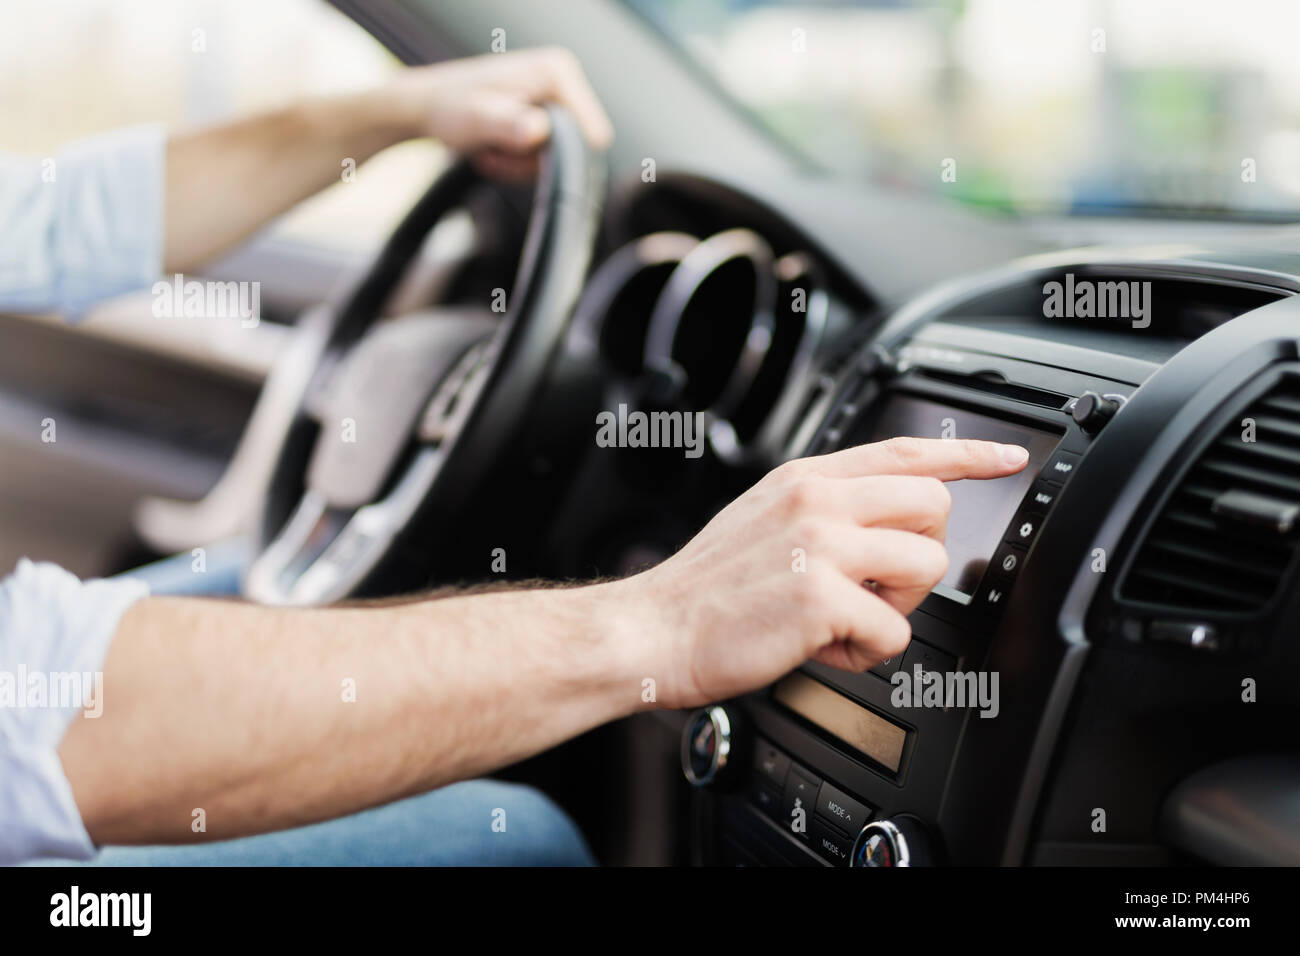 Man Using Gps Navigation System In Car Stock Photo